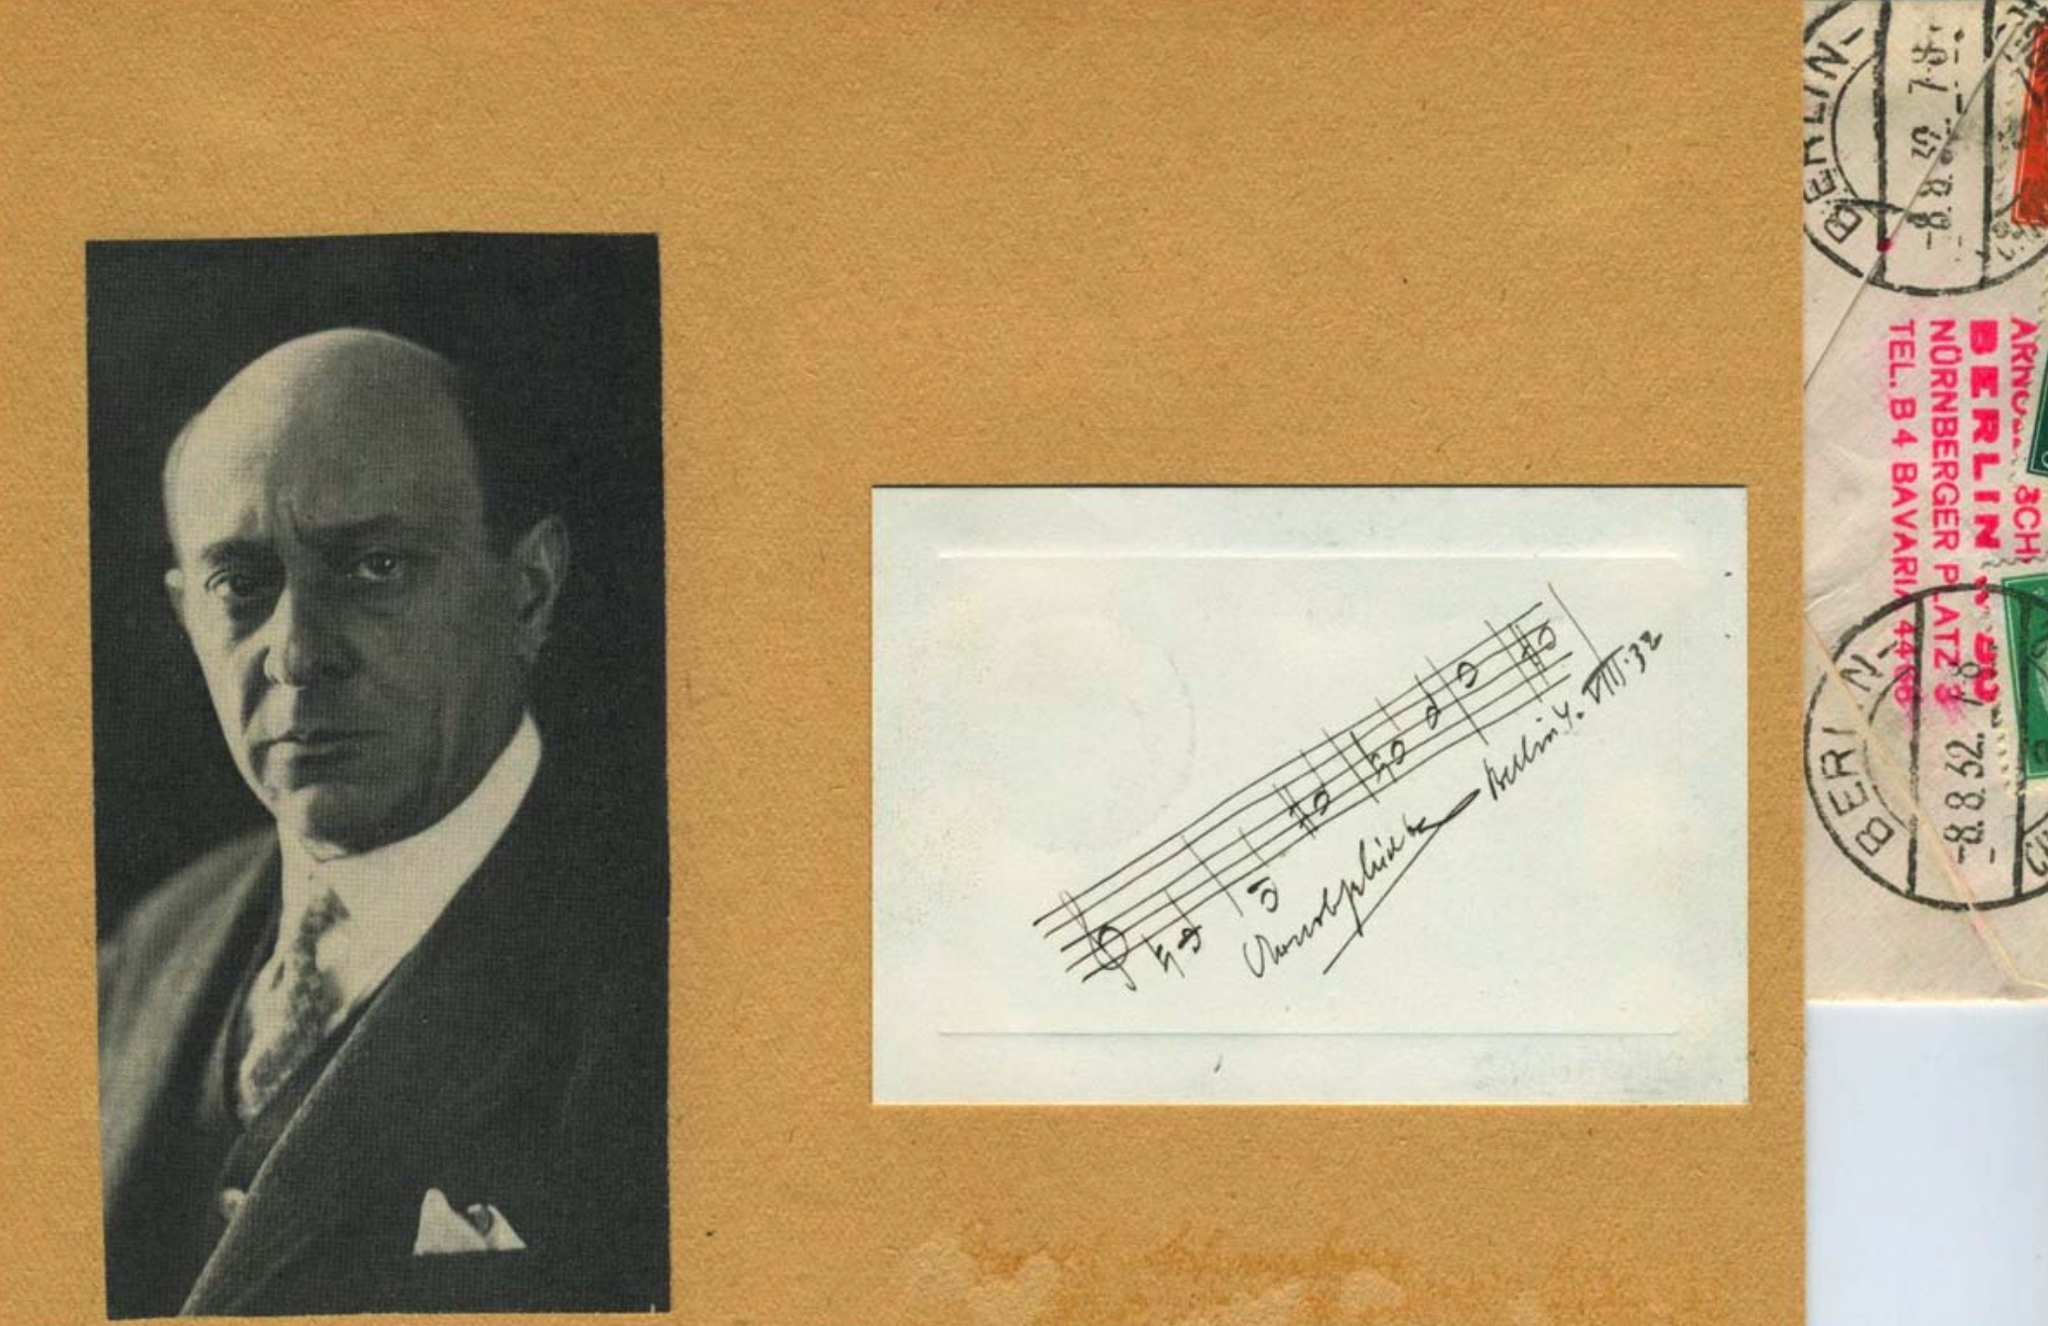 Schoenberg, Arnold. (1874-1951): Autograph Musical Quotation from Orchestral Variations, Op. 31